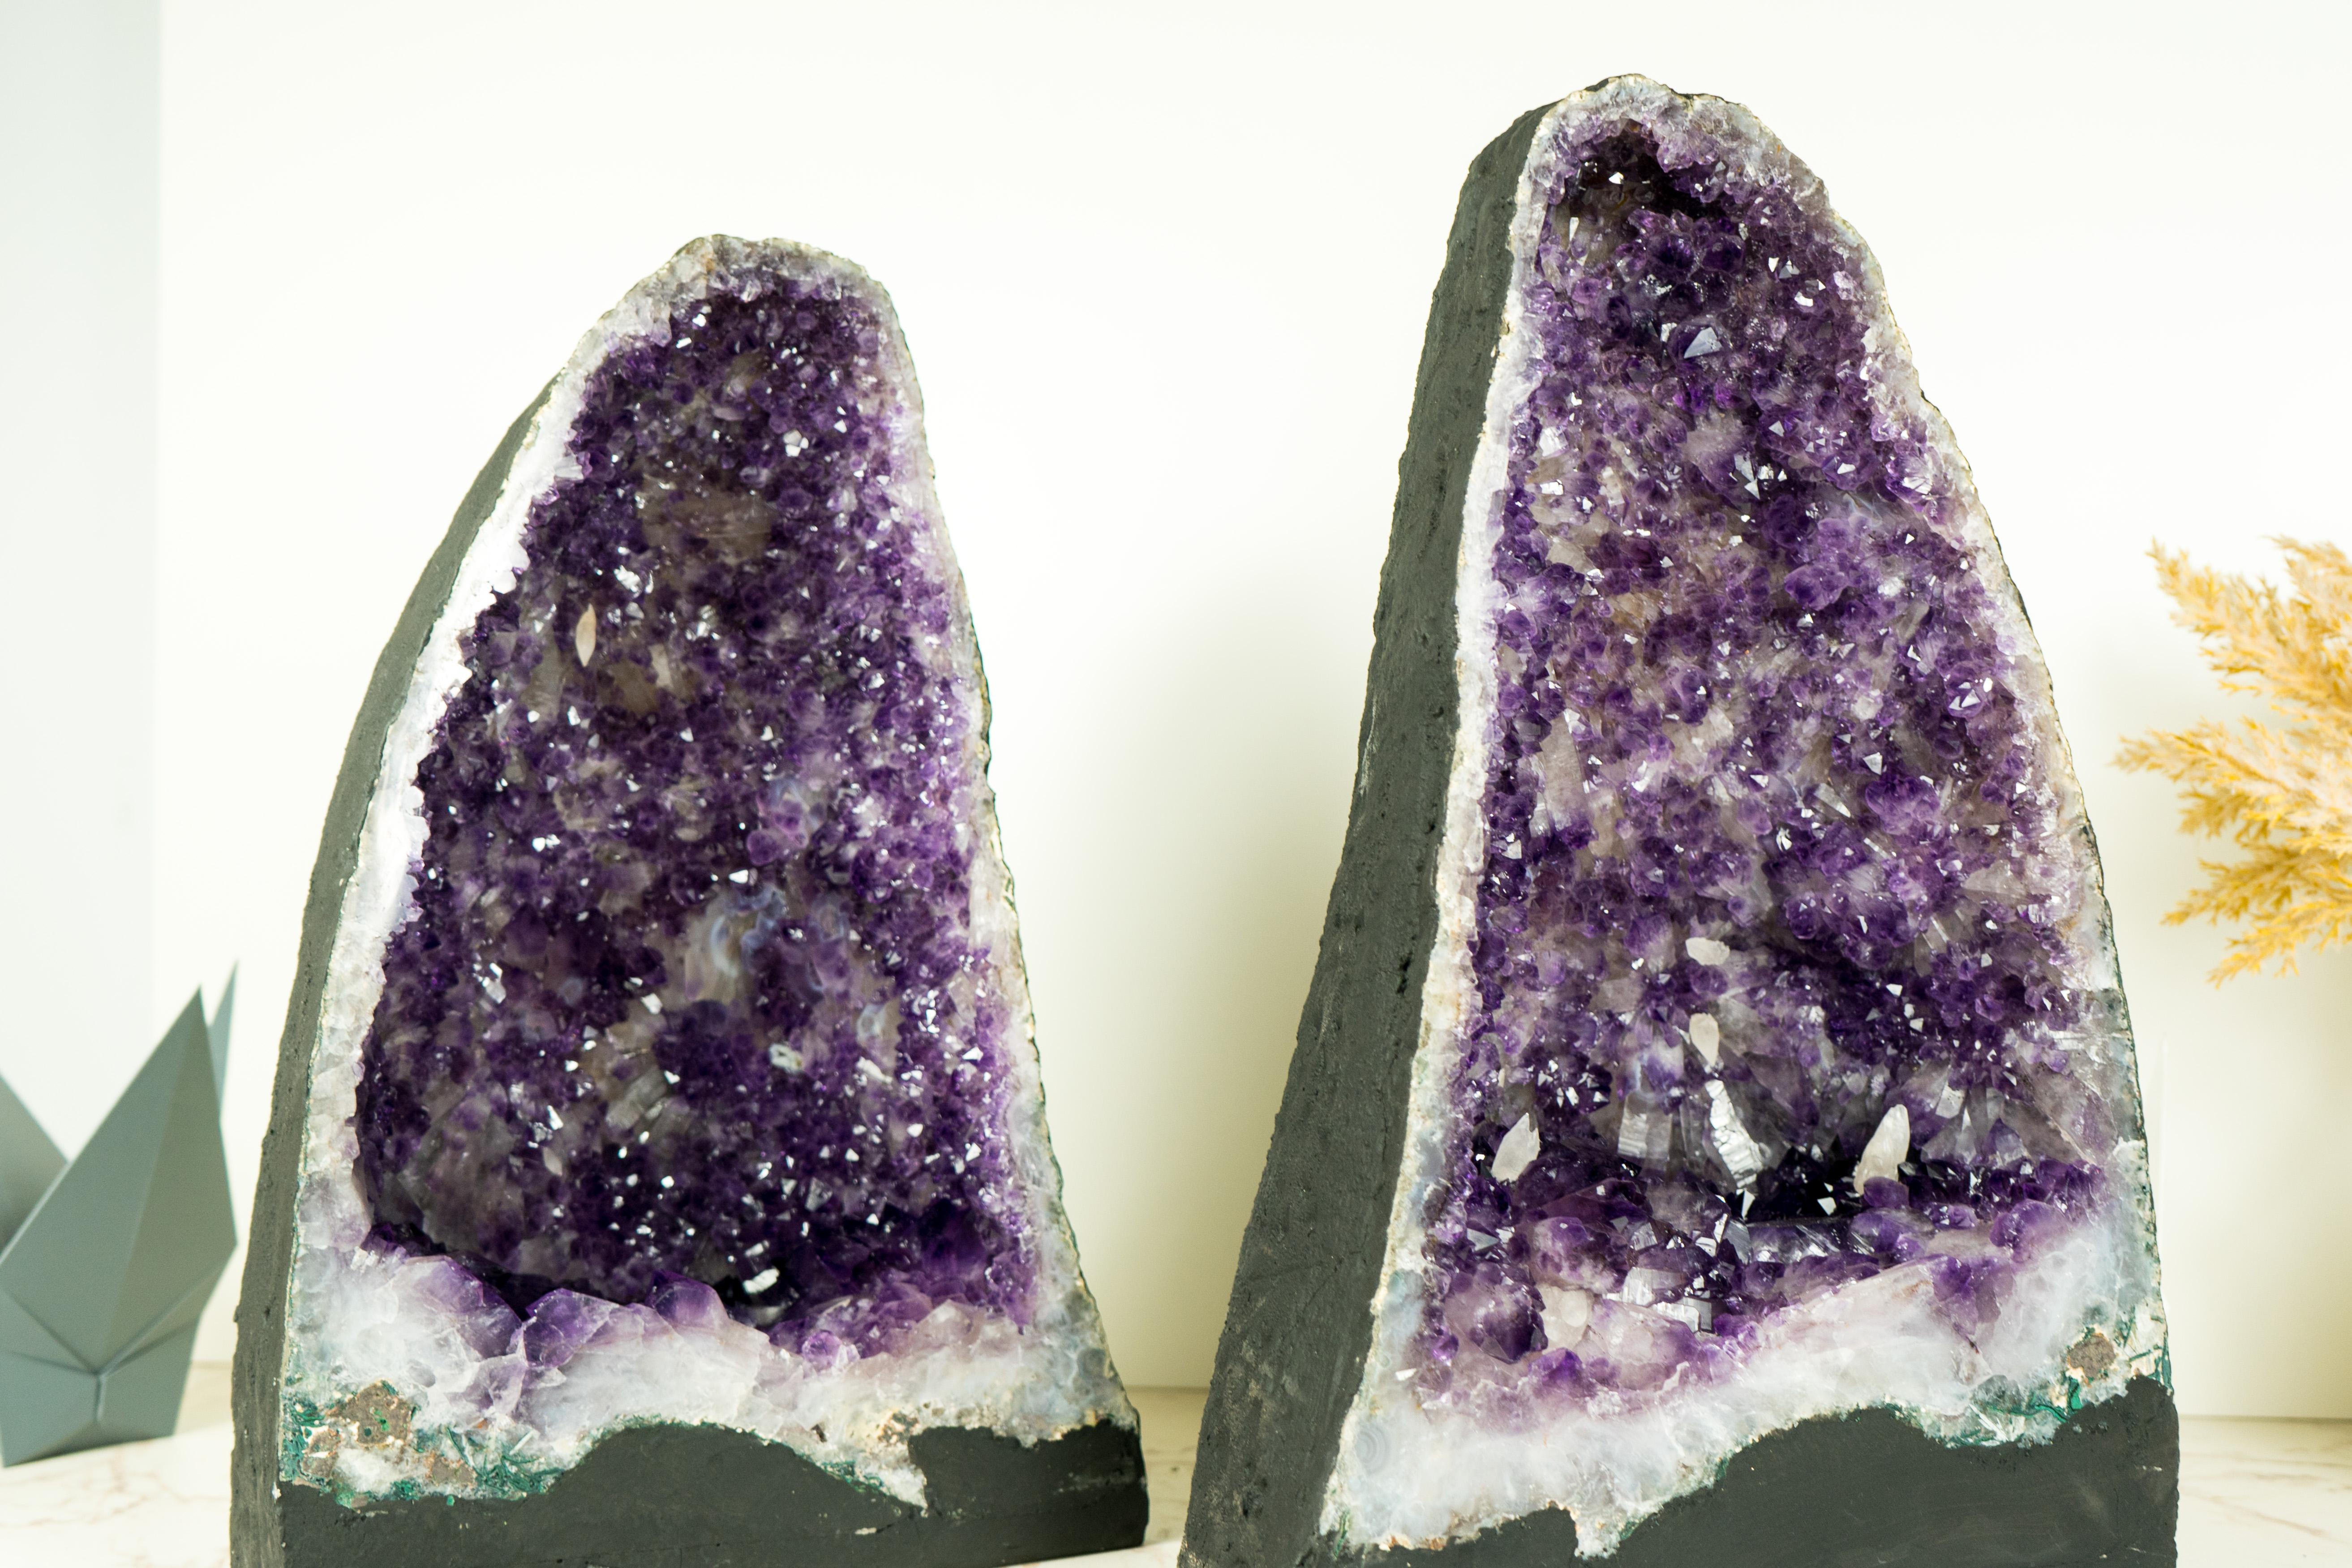 A pair of Amethyst Geodes, each bringing the rarely seen dual-zoned purple Amethyst druzy, gorgeous aesthetics, and rare calcite inclusions, are pieces of natural artistry. These geodes are centerpieces that will elevate your home or office decor to